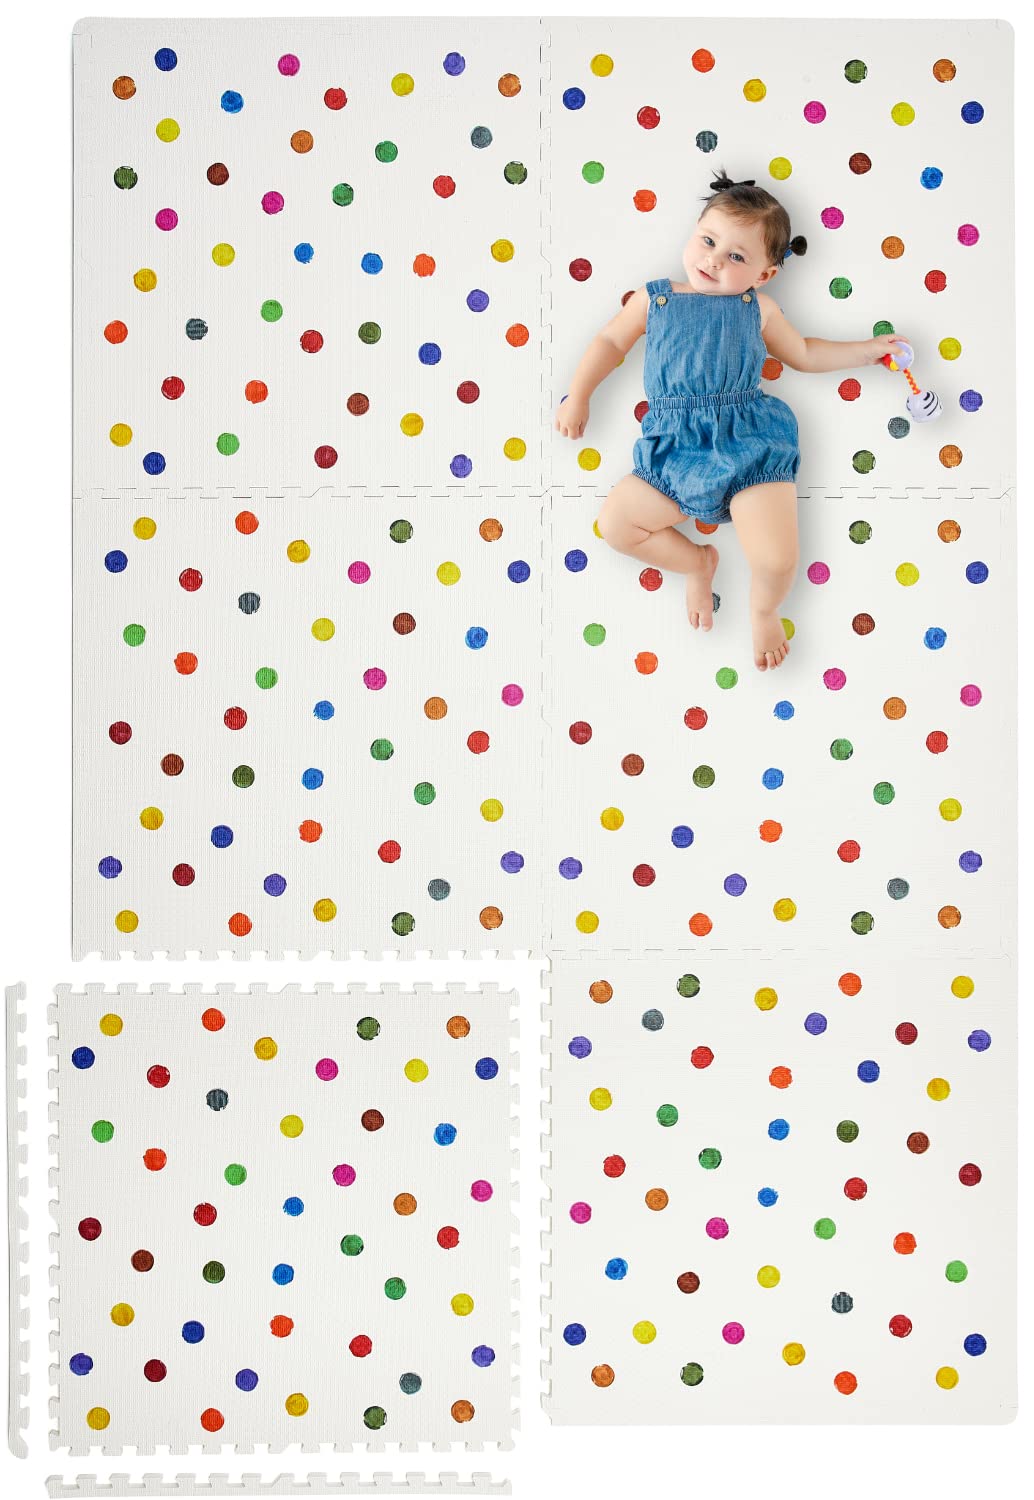 Yay Mats Stylish Extra Large Baby Play Mat. Soft, Thick, Non-Toxic Foam Covers 6 ft x 4 ft. Expandable Tiles with Edges Infants and Kids Playmat Tummy Time Mat (Cassia Polka Dot)